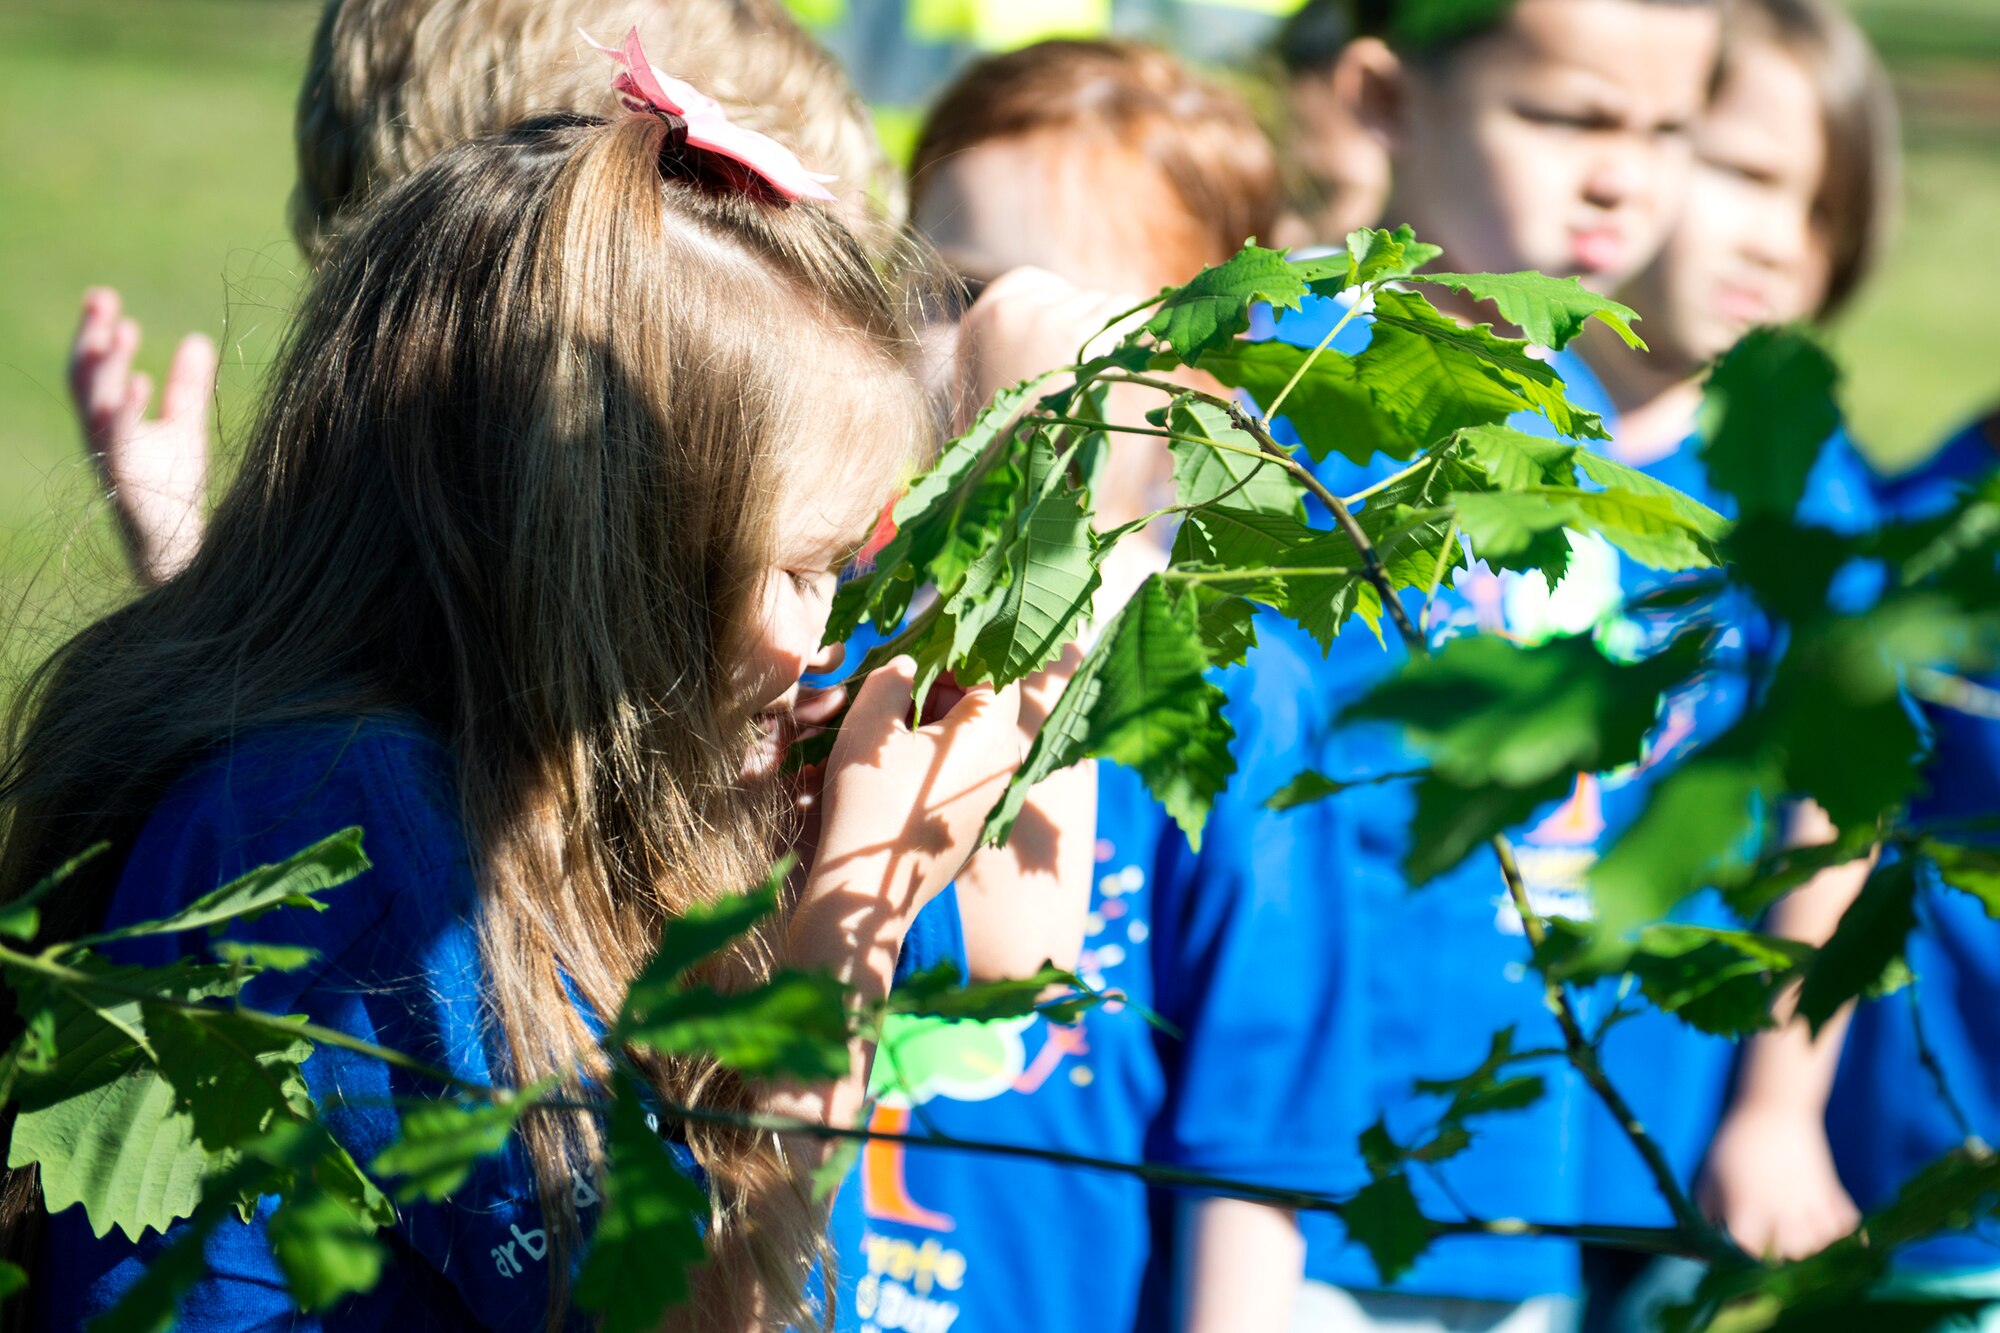 A child from Moody’s child development center smells the leaf of an oak tree during Arbor Day, April 27, 2018, at Moody Air Force Base, Ga. Moody annually celebrates the holiday which encourages the benefits of planting trees. For 19 years the base has been a part of the Tree City USA Program by the National Arbor Day Foundation, to better prepare for the future of caring for their Airmen through improved ecological sustainability.  (U.S. Air Force photo by Airman 1st Class Erick Requadt)